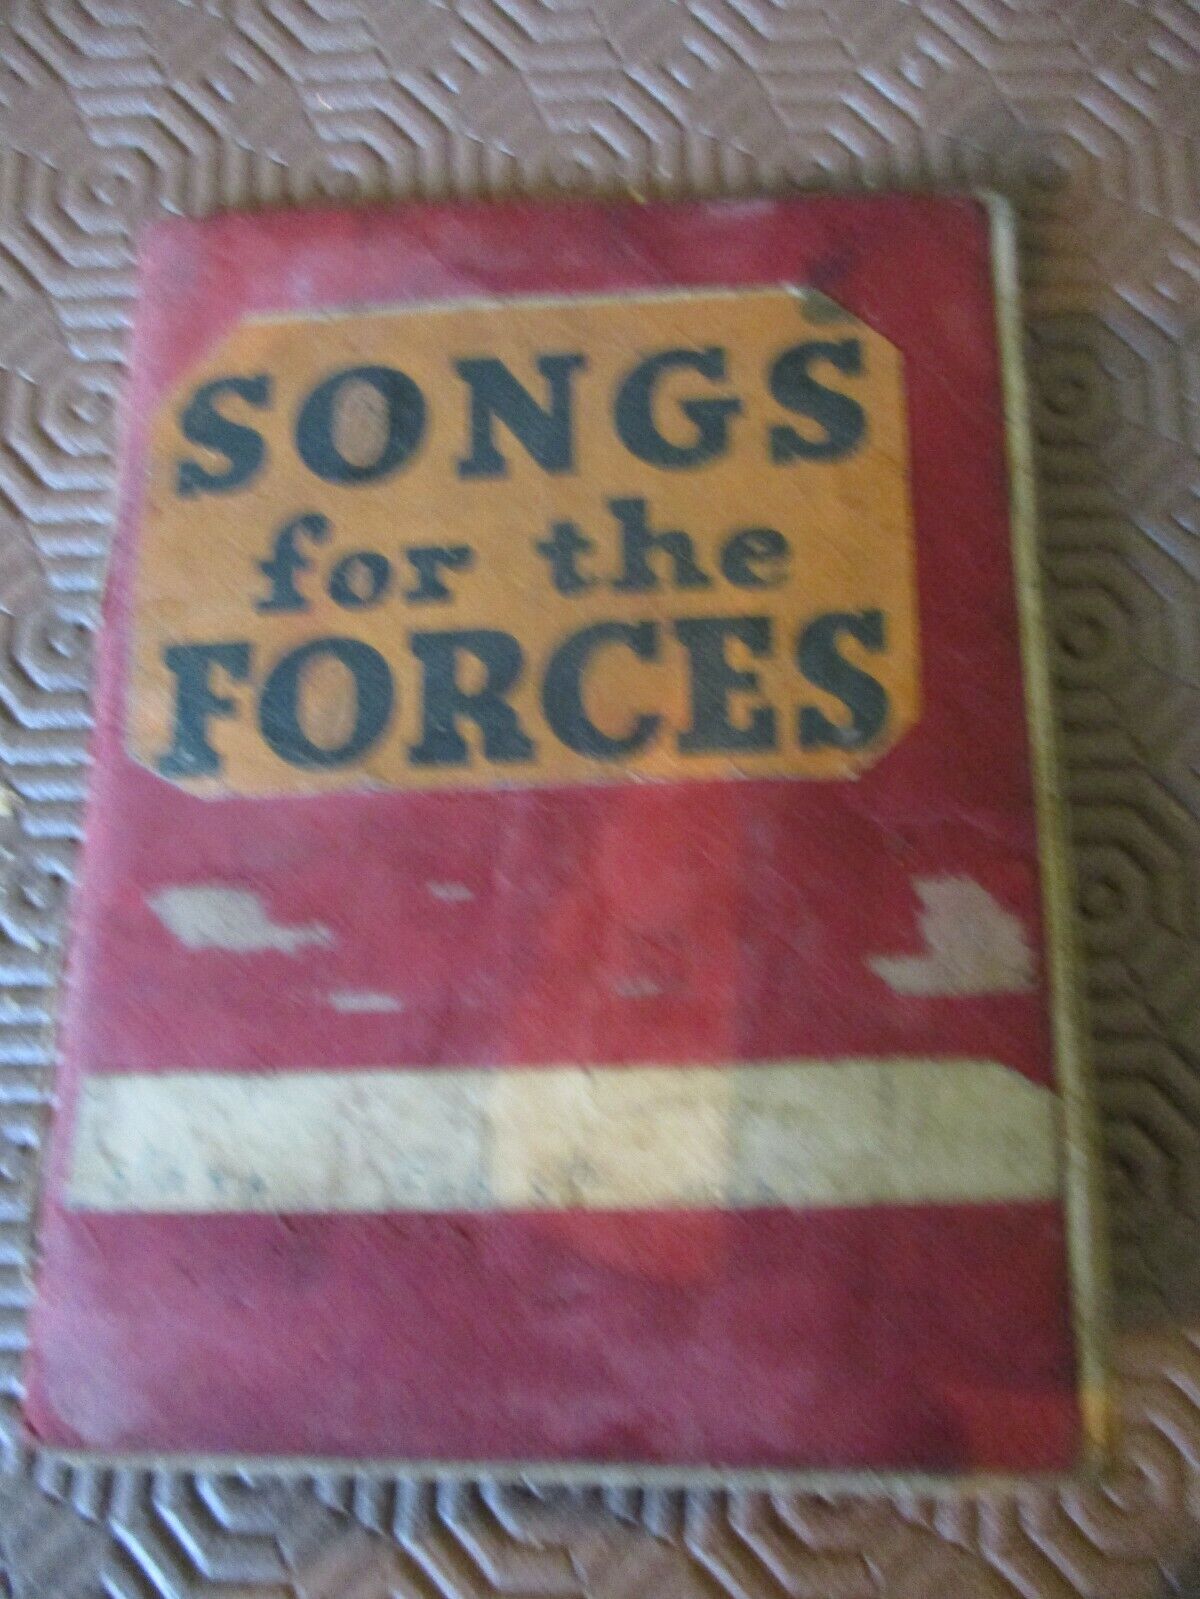 Songs for the Forces